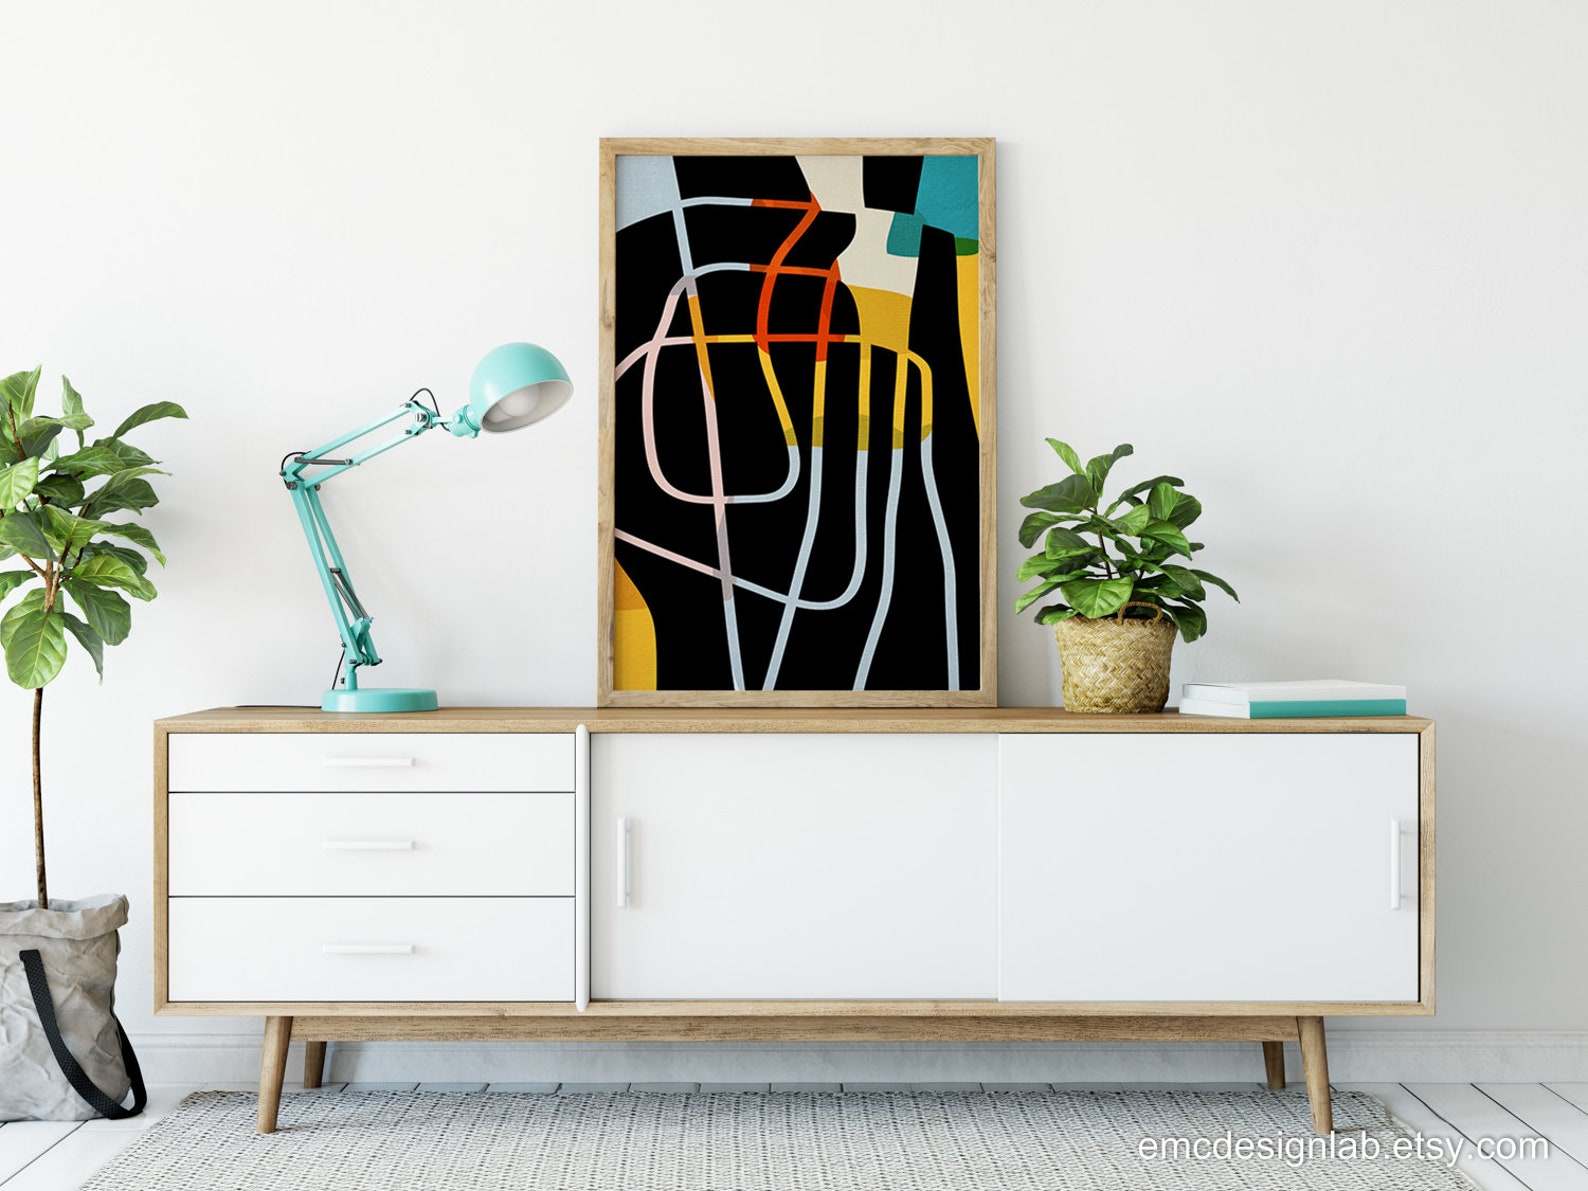 Original Abstract Art / Contemporary Art Poster / Large Size - Etsy